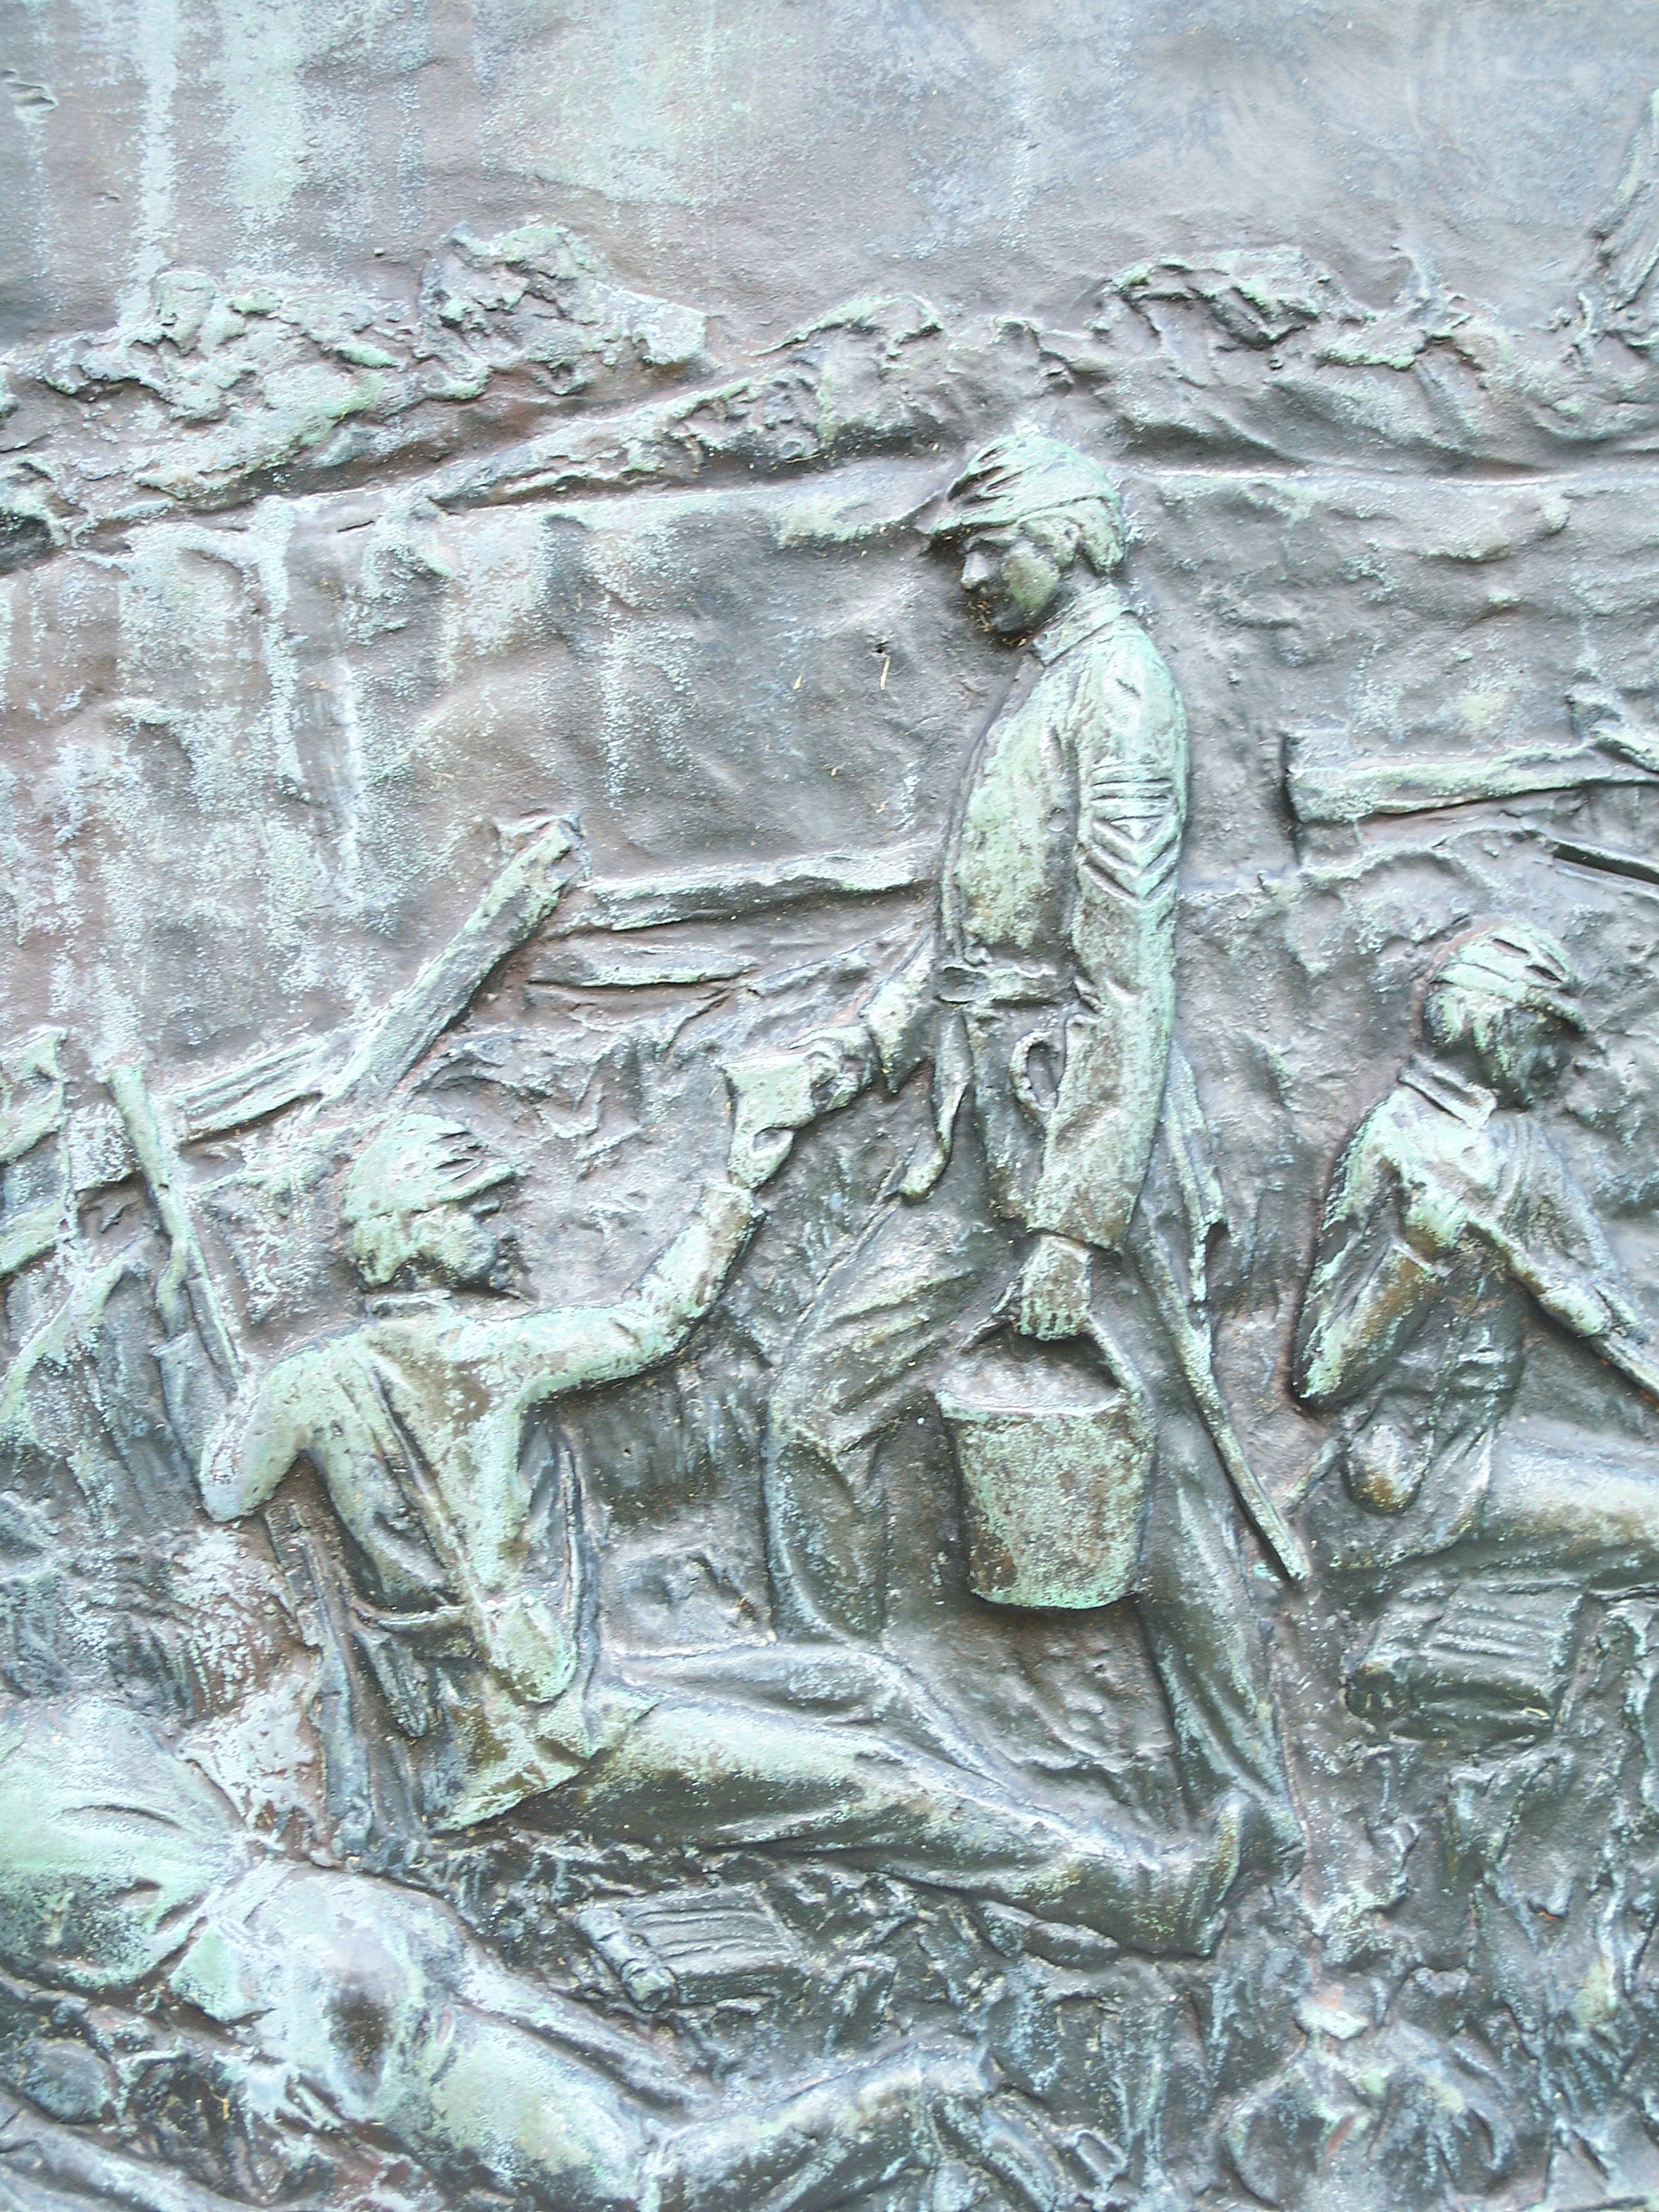  This relief tablet depicts McKinley bringing coffee to tired and wounded solders during the battle. 